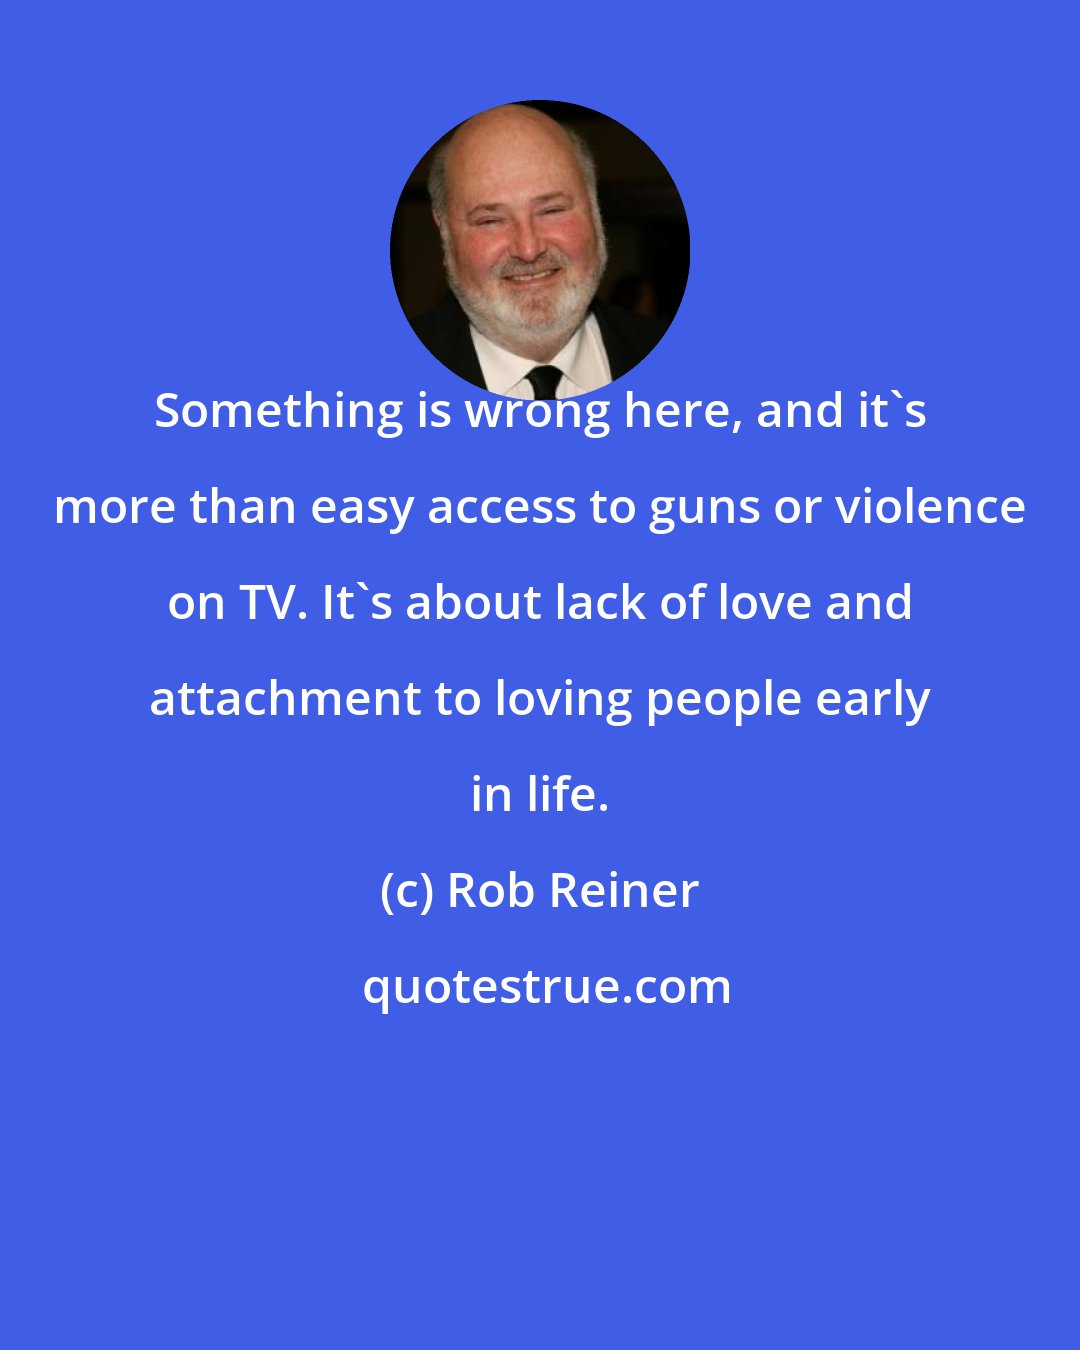 Rob Reiner: Something is wrong here, and it's more than easy access to guns or violence on TV. It's about lack of love and attachment to loving people early in life.